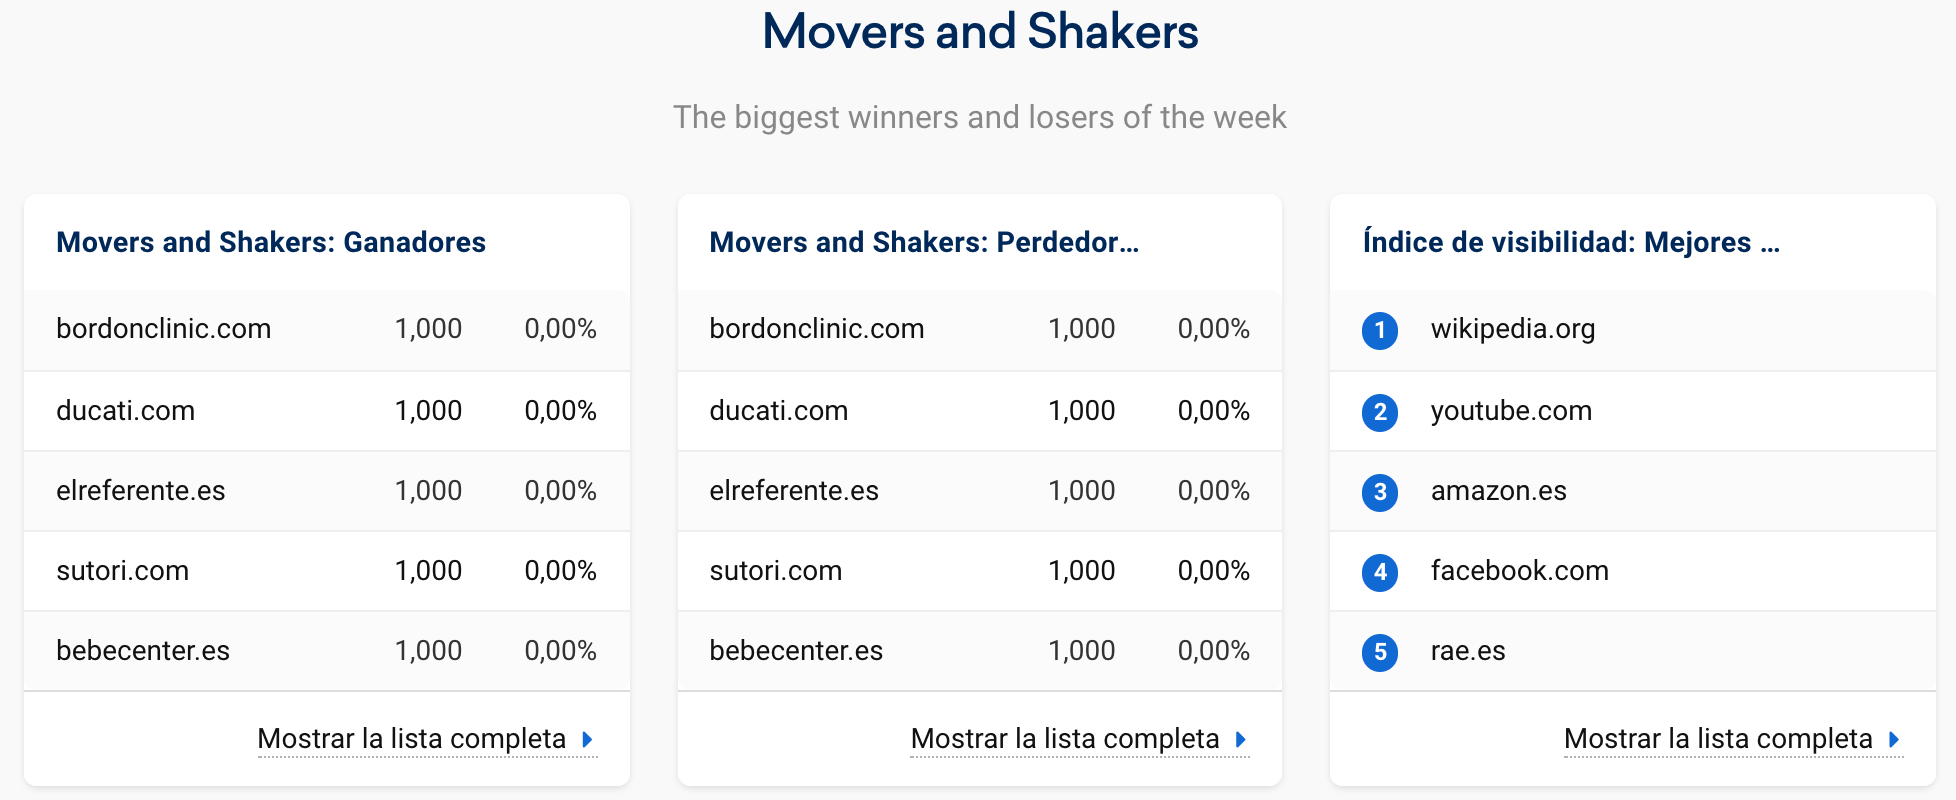 movers and shakers 